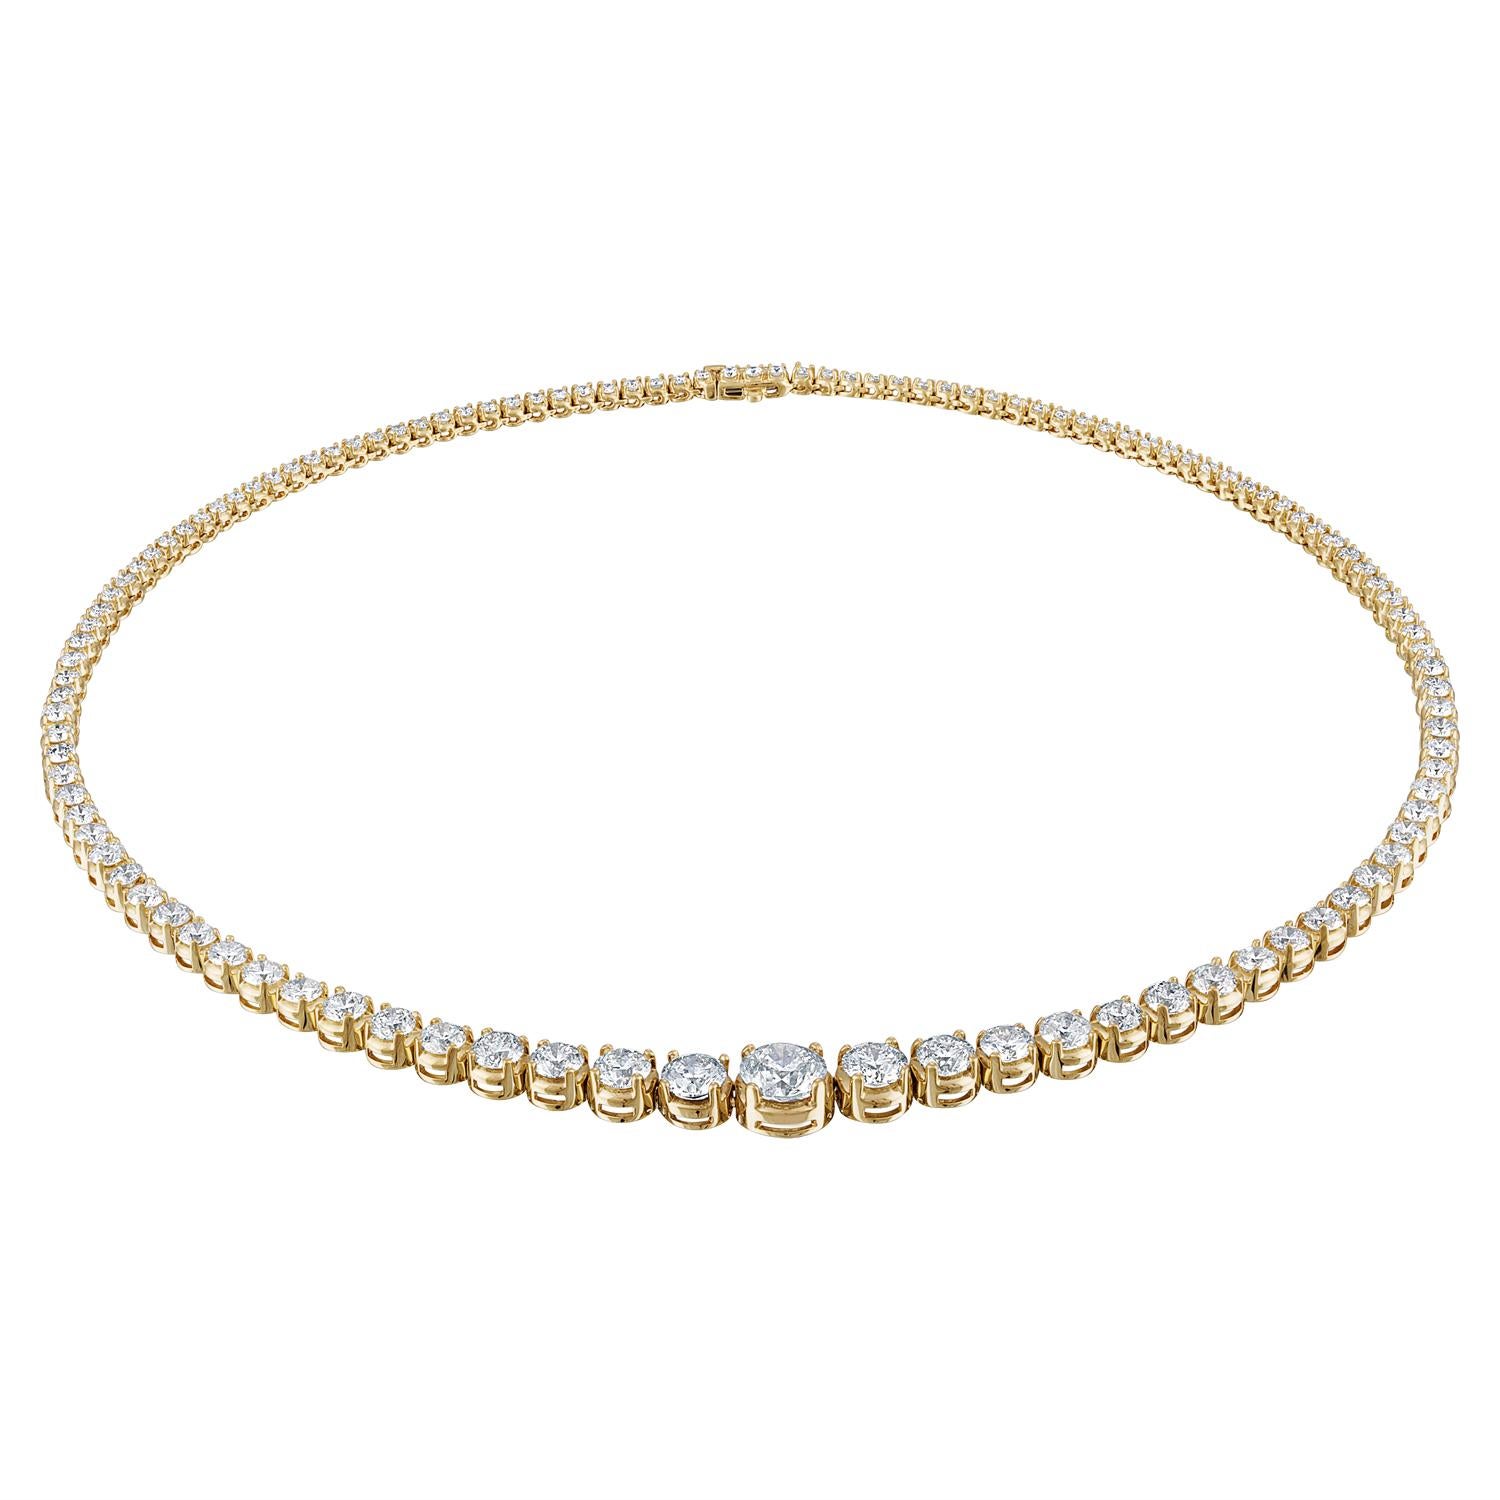 14K Tennis Necklace of graduating Diamonds are the Classic Necklace every woman desires for.
This Necklace is 16 3/4 inches long and has 115 Round Brilliant Diamonds on it totaling to 18.08 Carats of Diamonds. The Center Diamond weight 2.15 Carat.